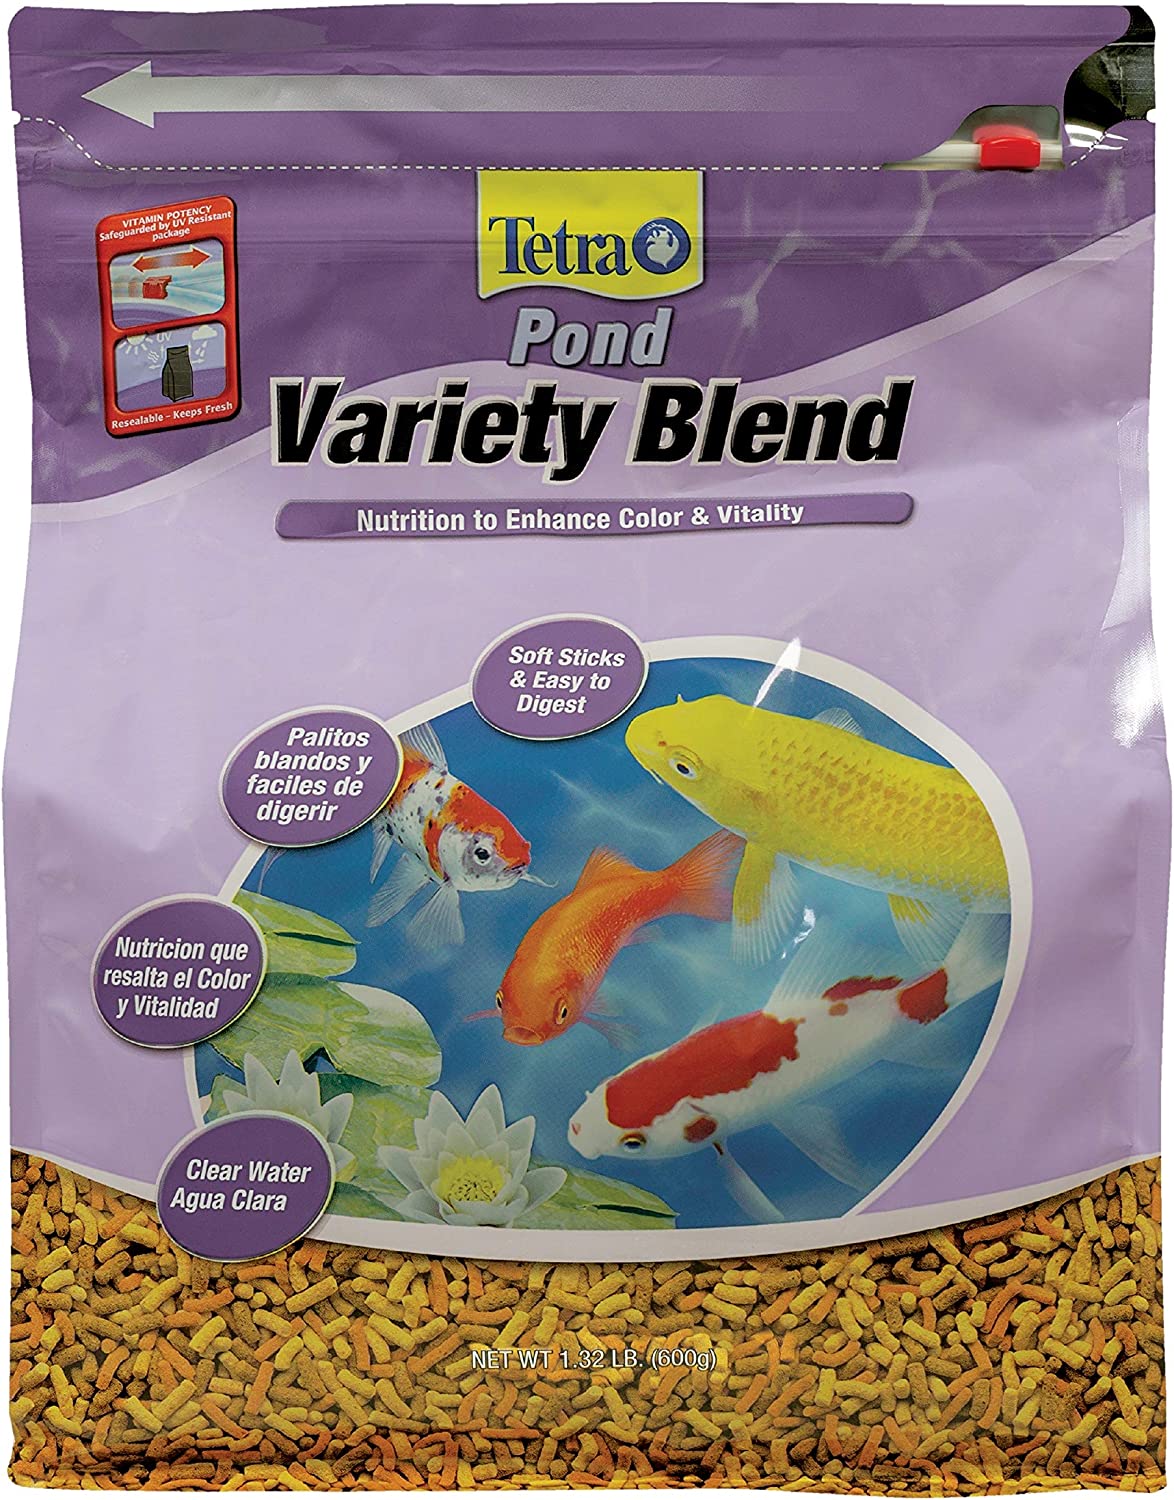 Tetra Pond Variety Blend, Pond Fish Food, for Goldfish and Koi, 1.32 Pounds, Pack of 6